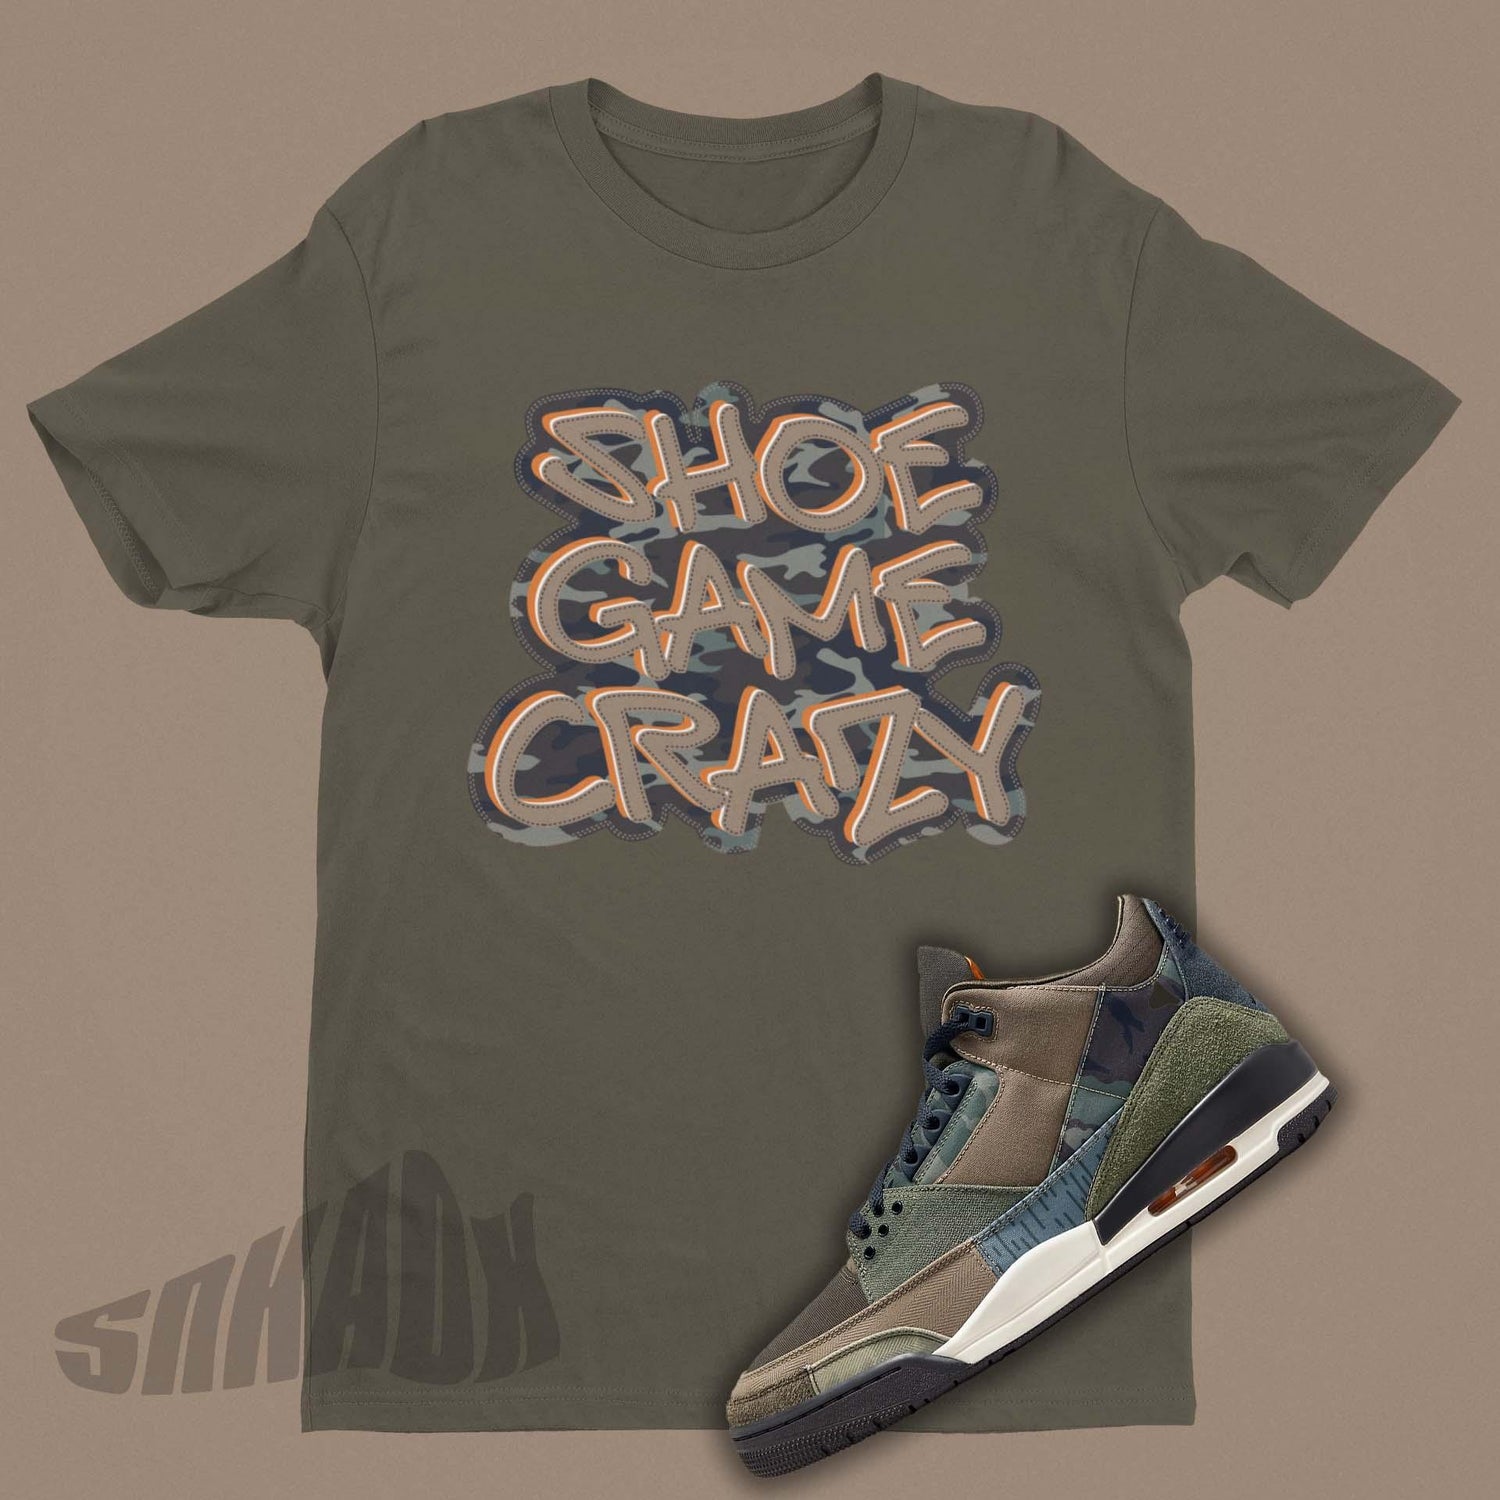 Military Camo Shirt with Shoe Game Crazy on front, Army Green Colored Shirt